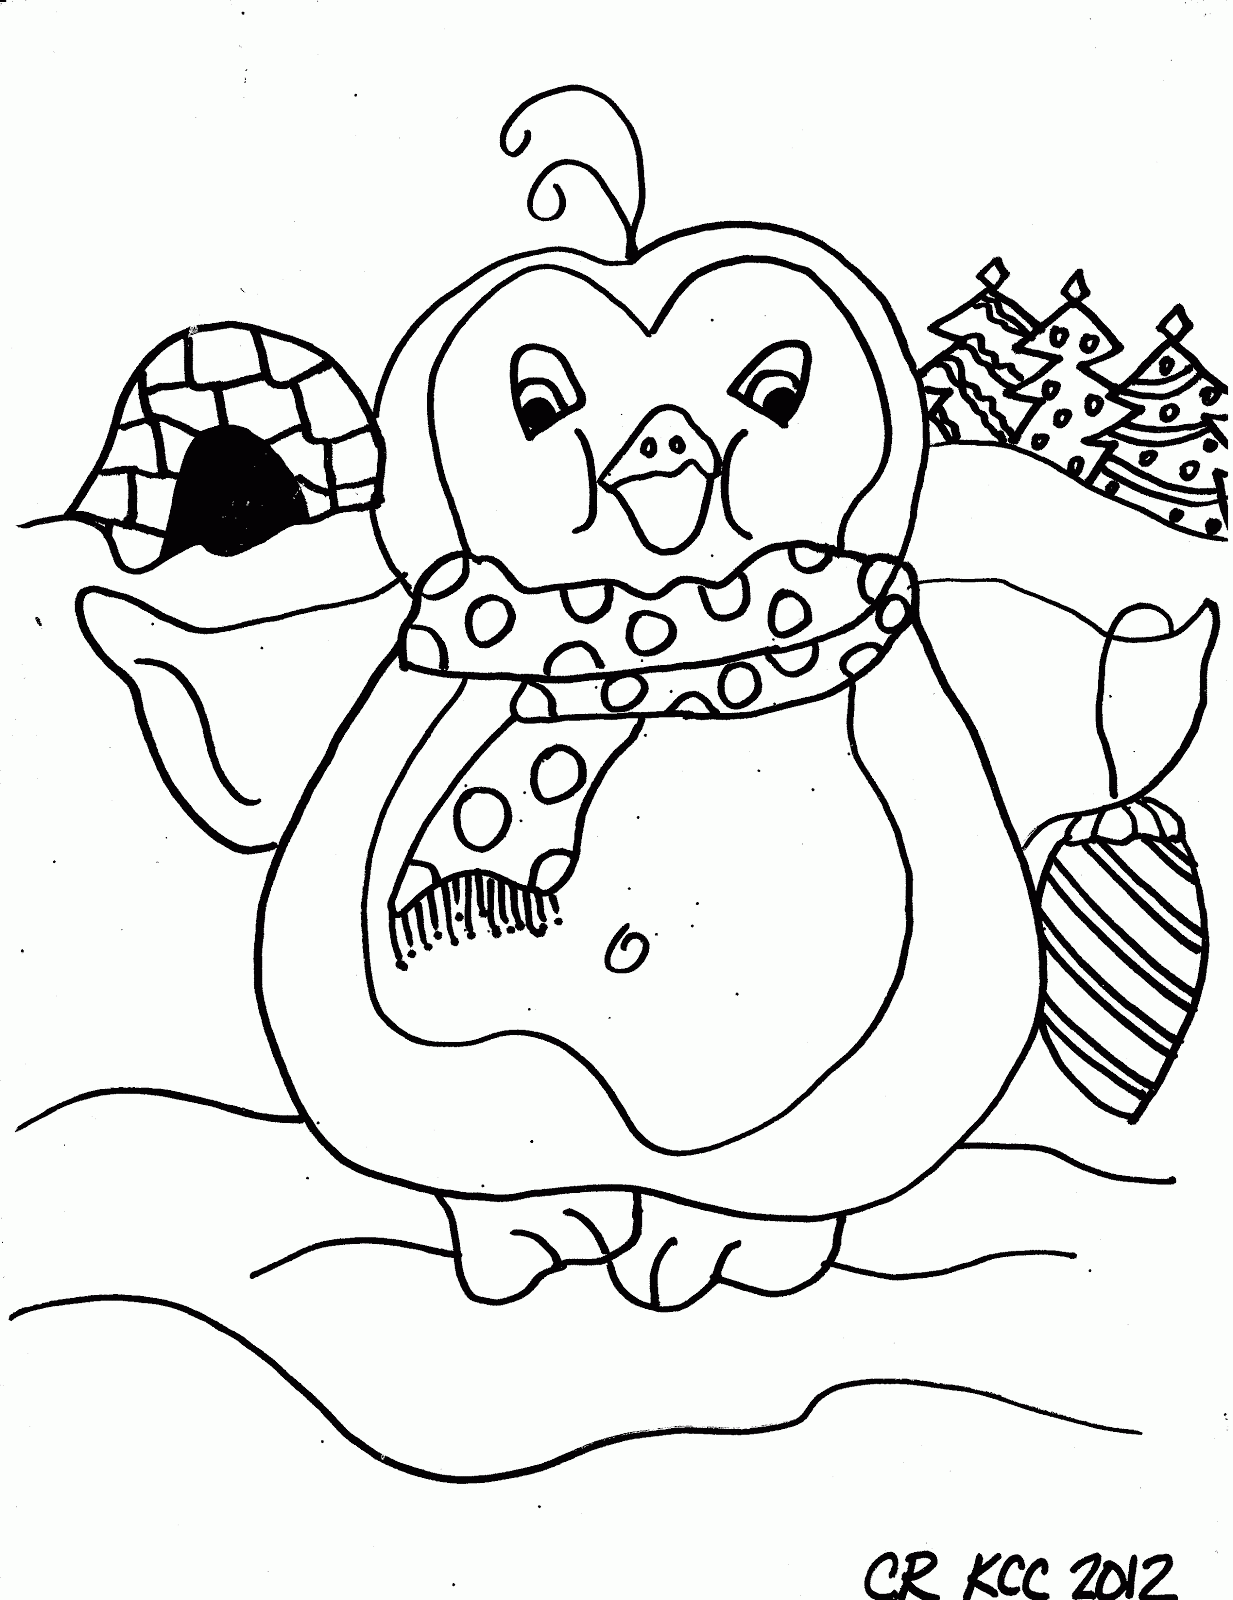 Penguins Are Snow Cute Coloring Sheet